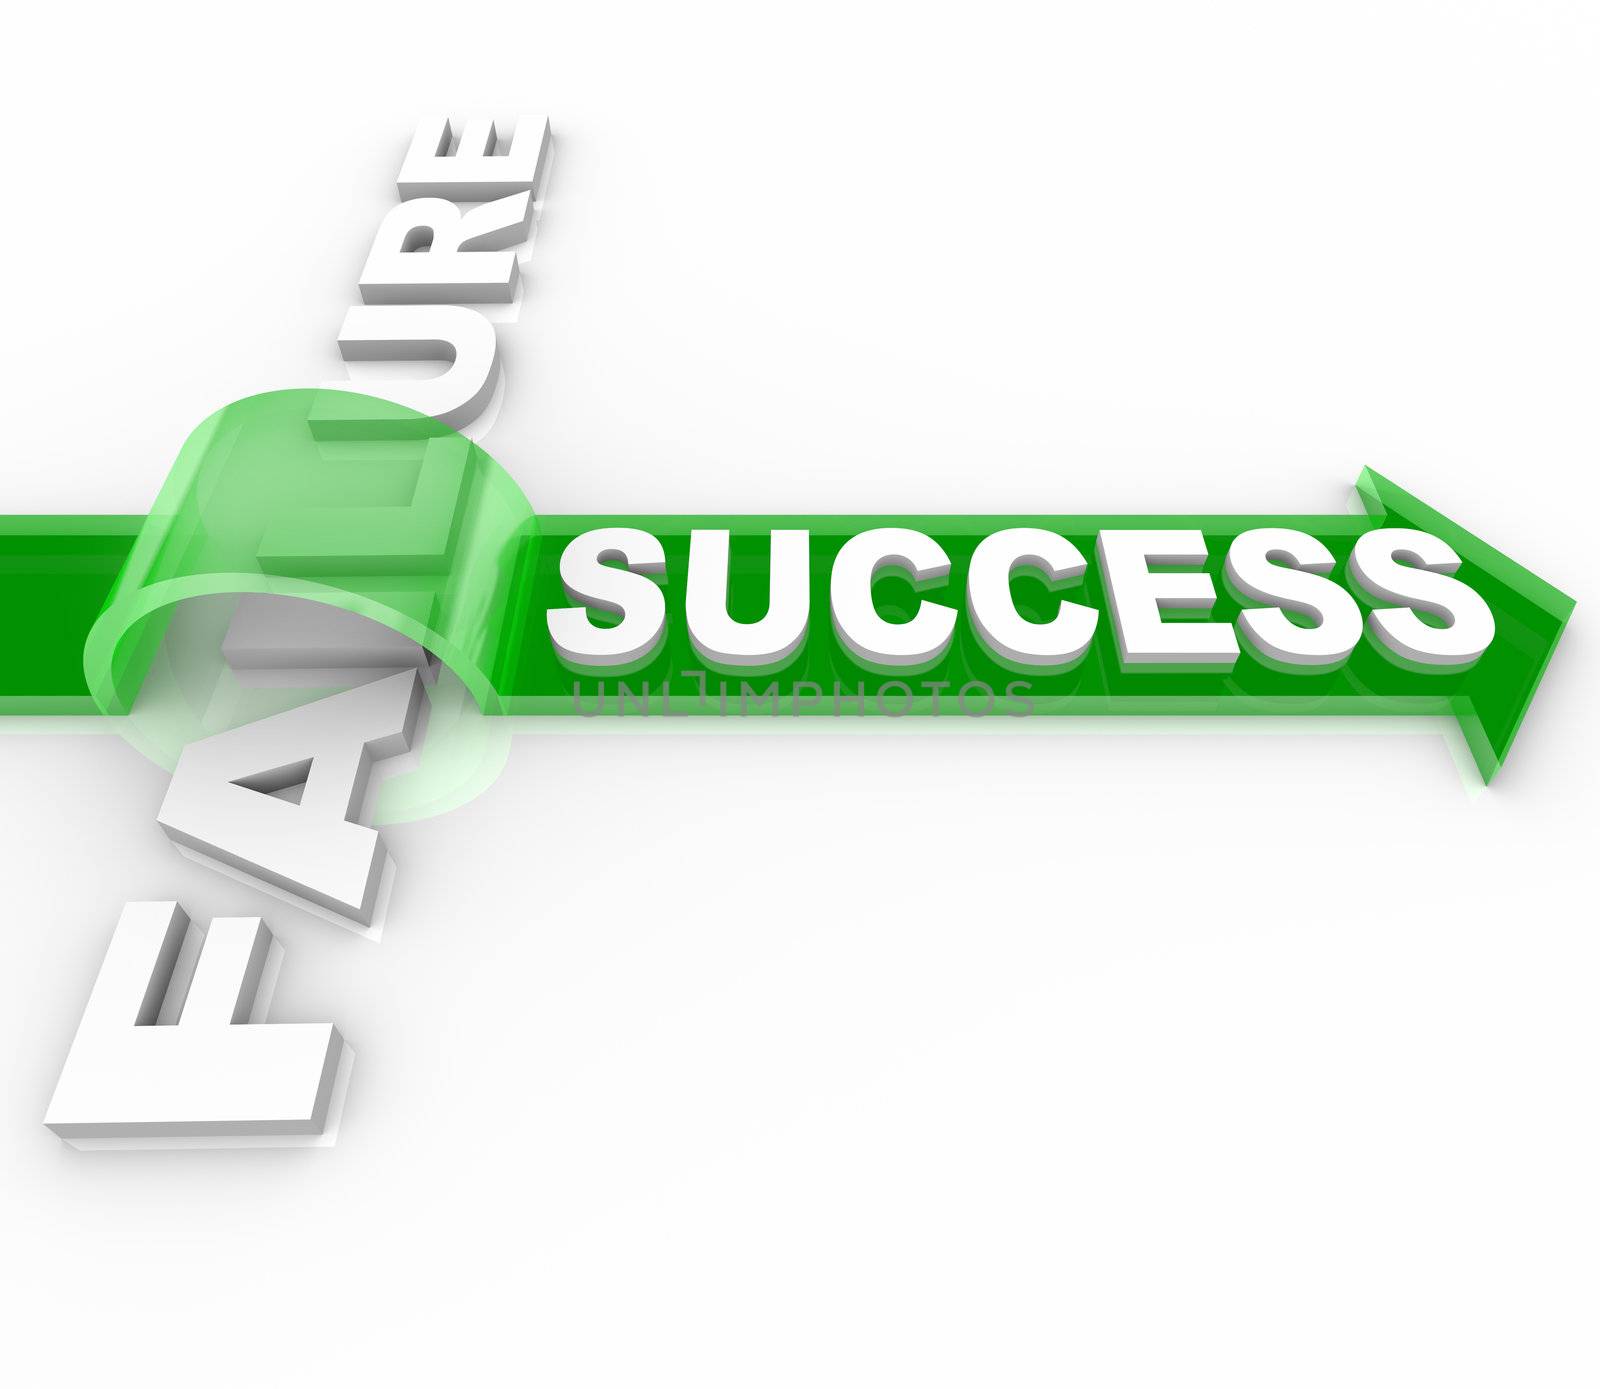 The word Success jumping over the word Failure on top of an arrow, symbolizing the overcoming of an obstacle and achieving your goals